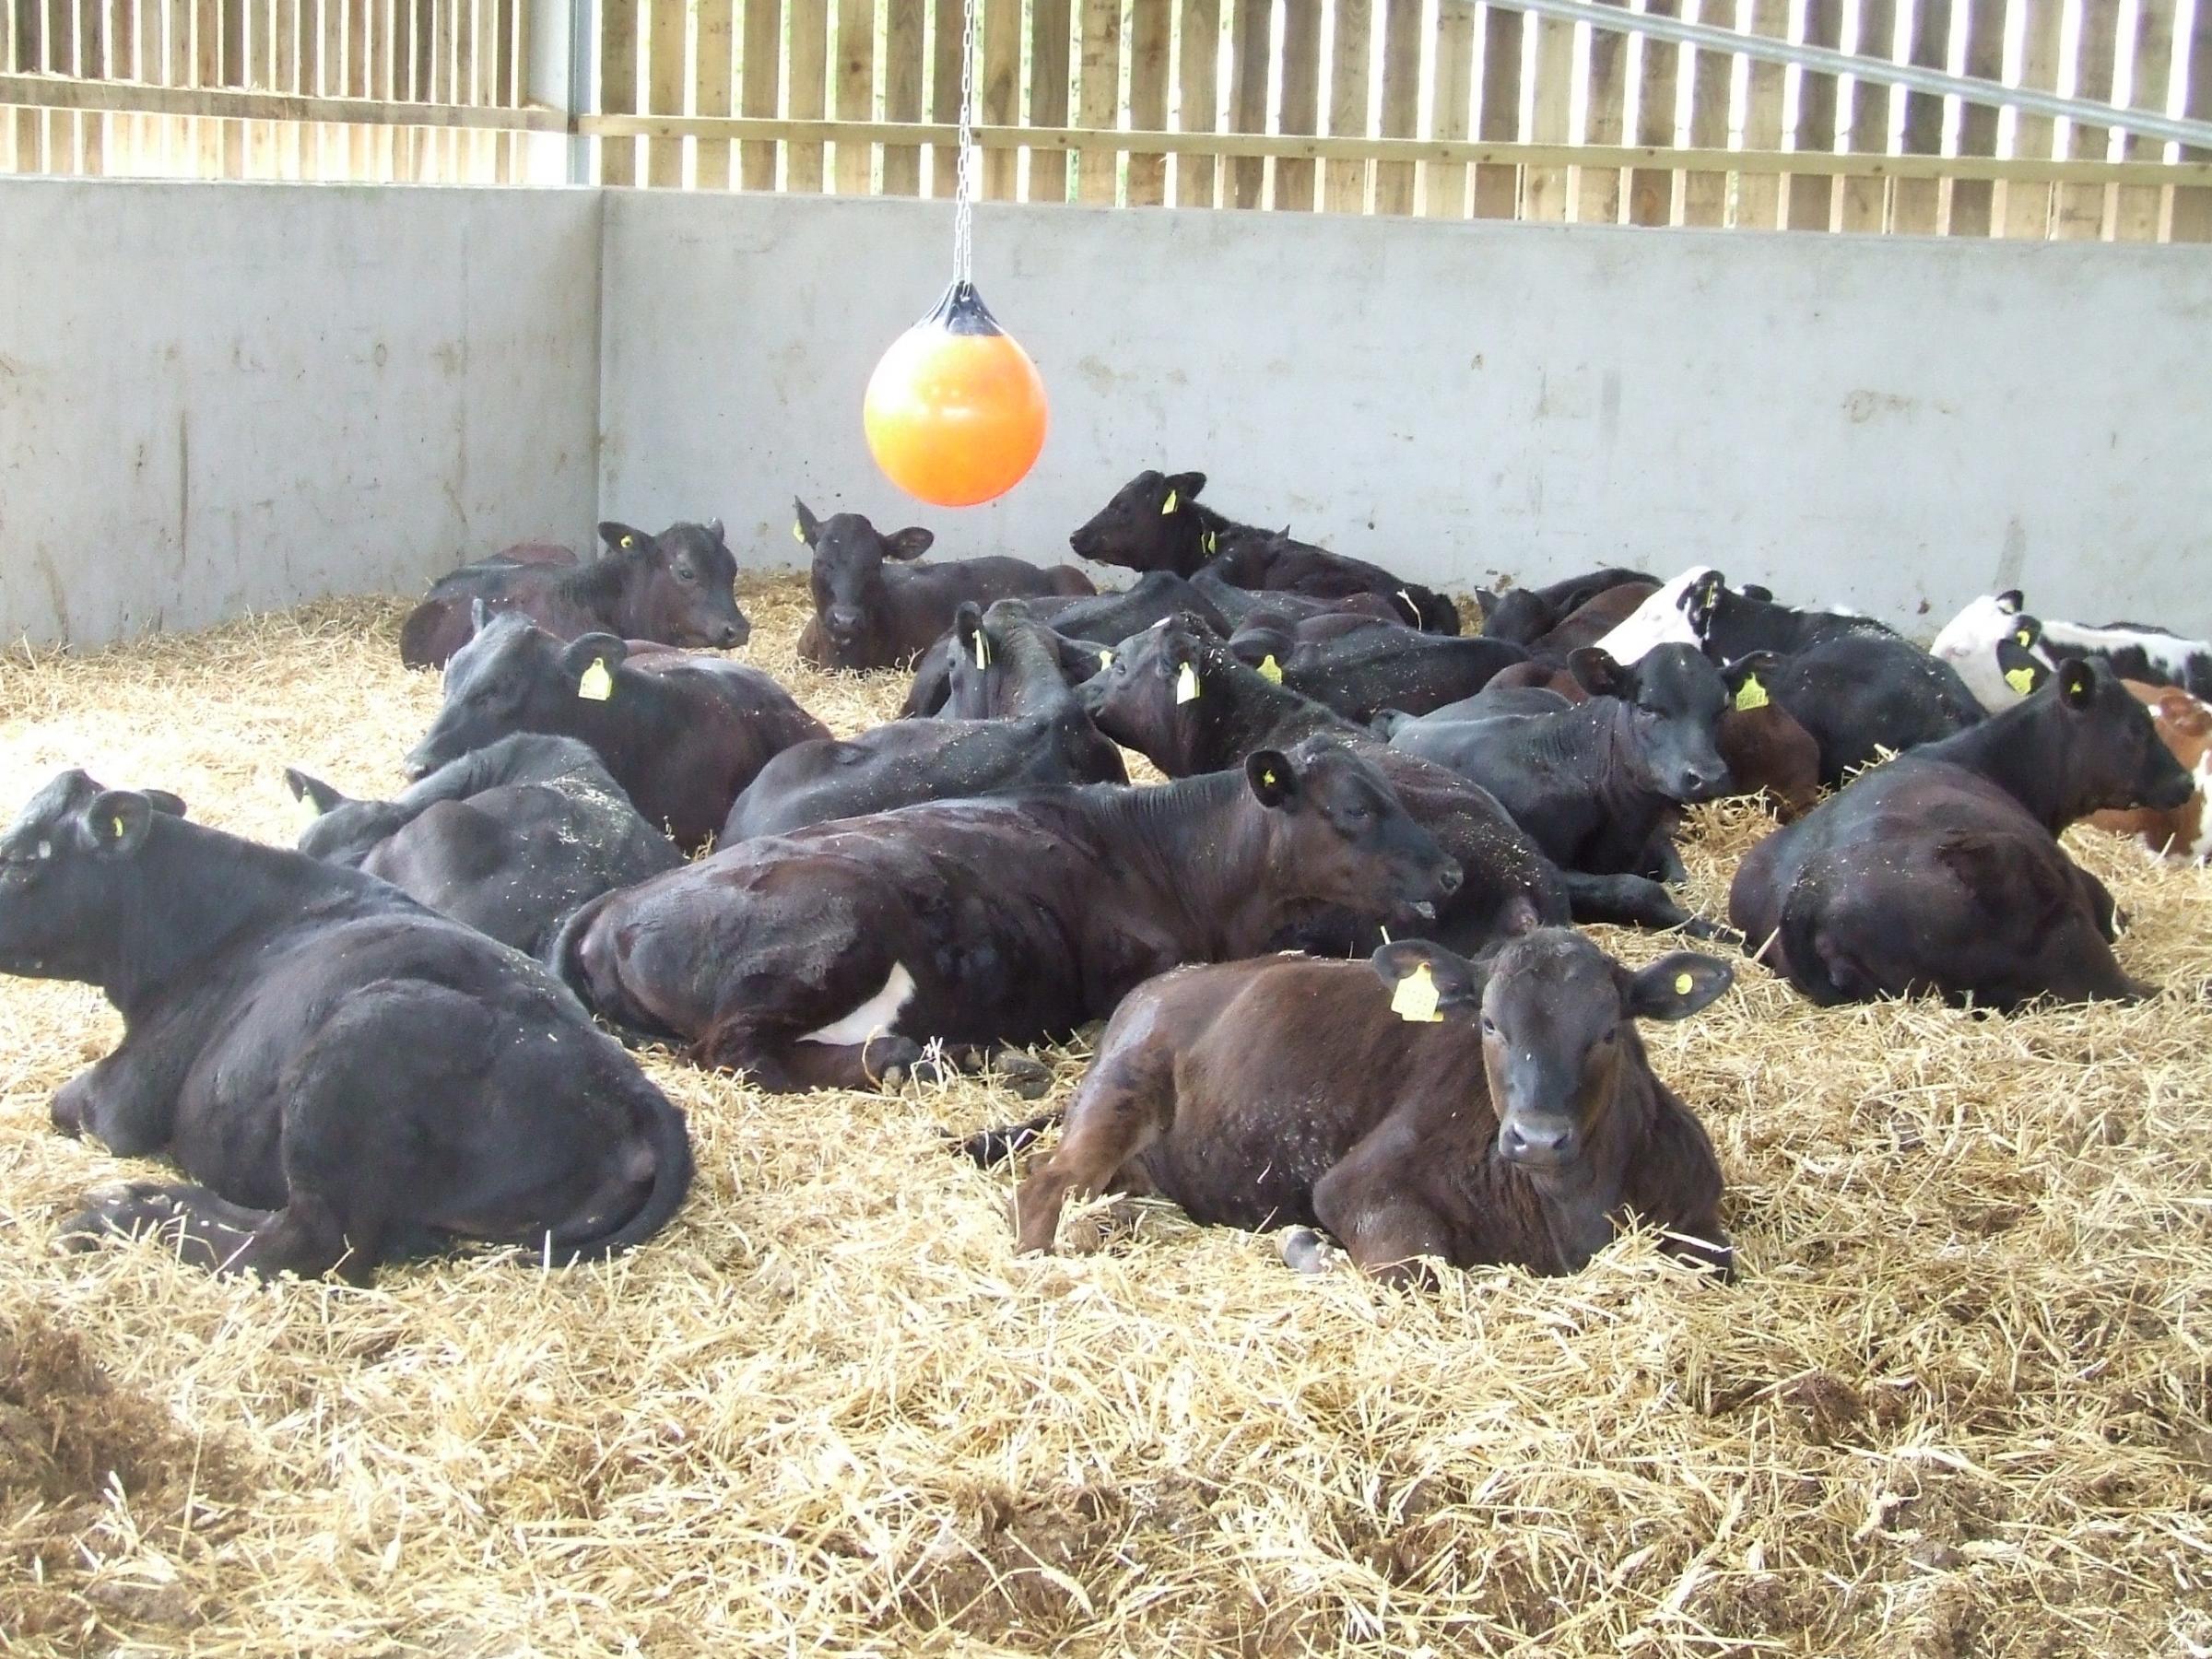 Contented calves reared in their age groups